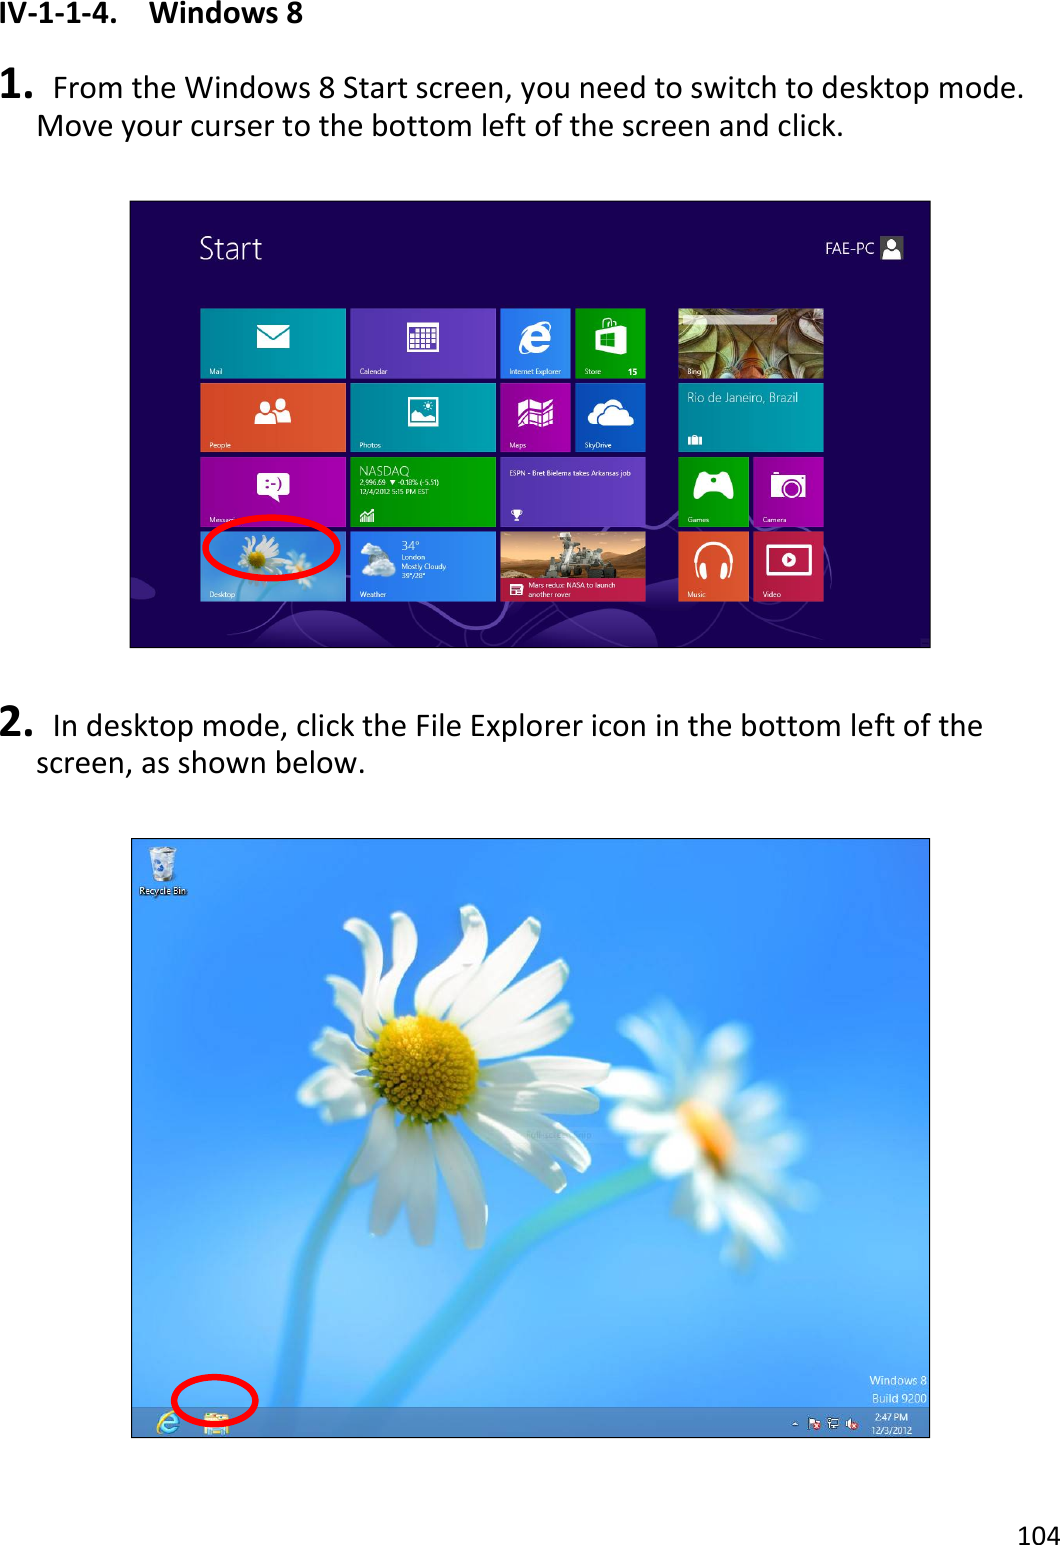 104  IV-1-1-4.  Windows 8  1.   From the Windows 8 Start screen, you need to switch to desktop mode. Move your curser to the bottom left of the screen and click.    2.   In desktop mode, click the File Explorer icon in the bottom left of the screen, as shown below.    